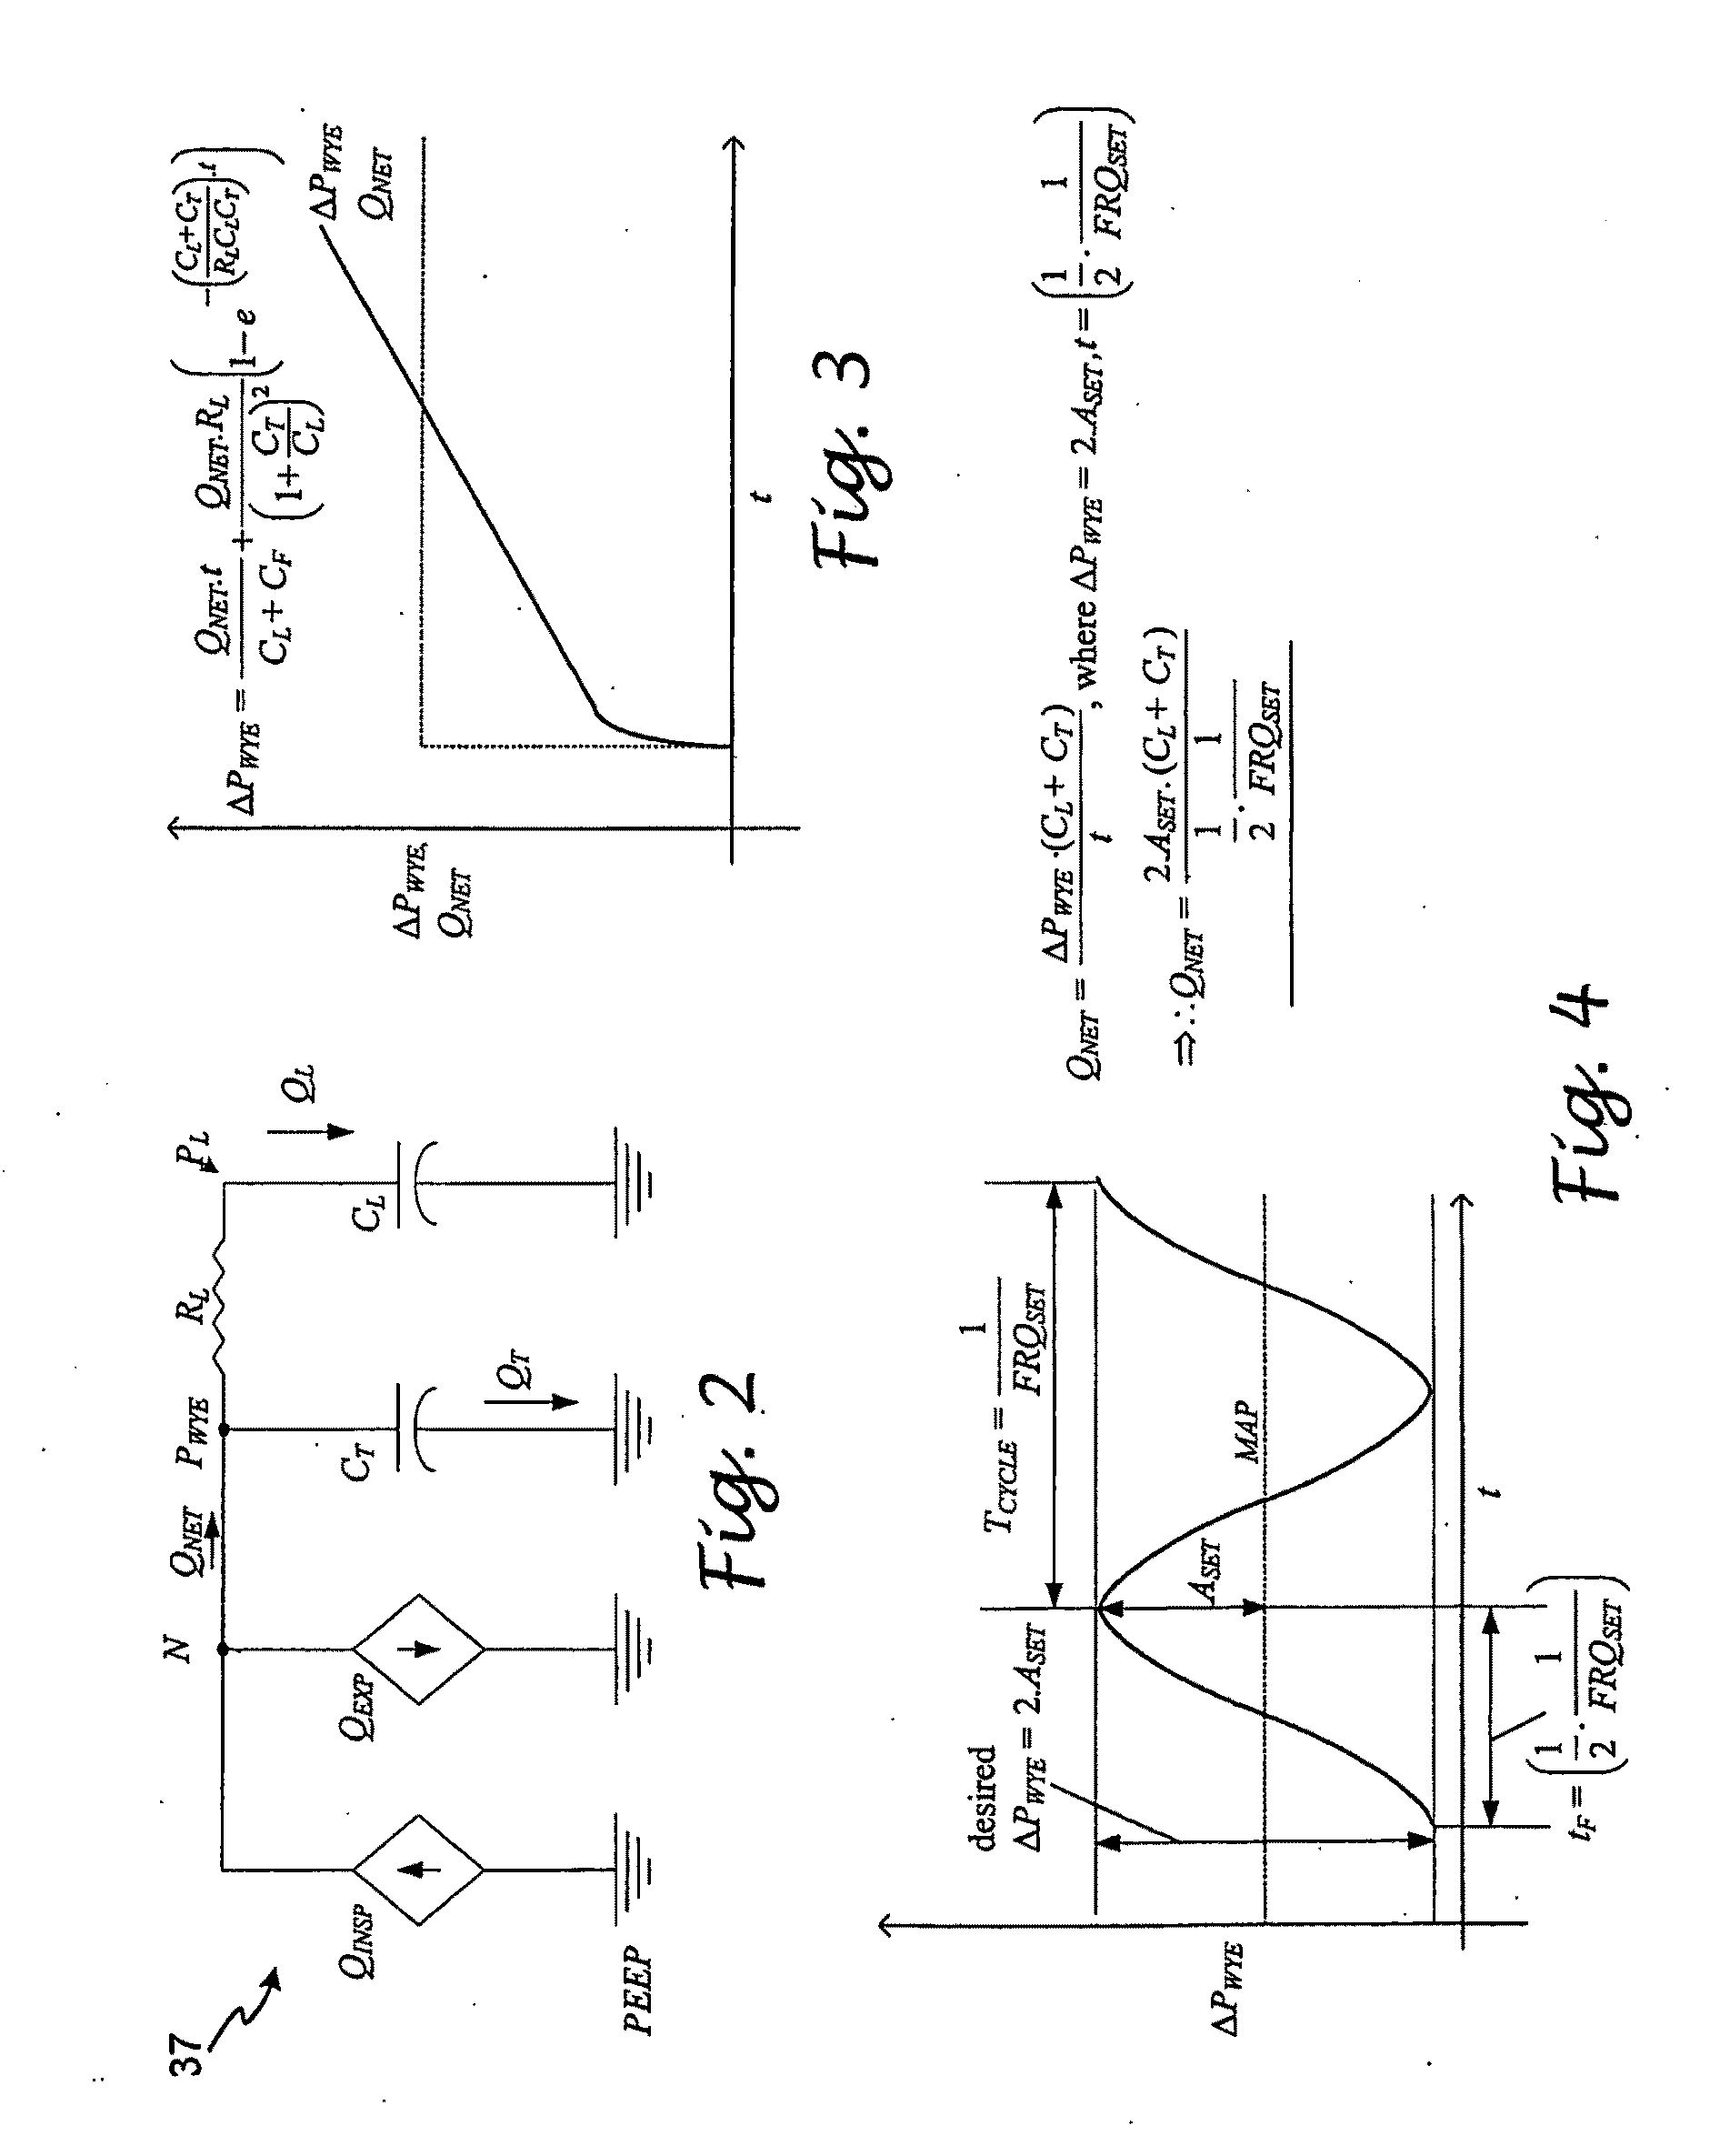 System and Method for Adaptive High Frequency Flow Interrupter Control In A Patient Repiratory Ventilator